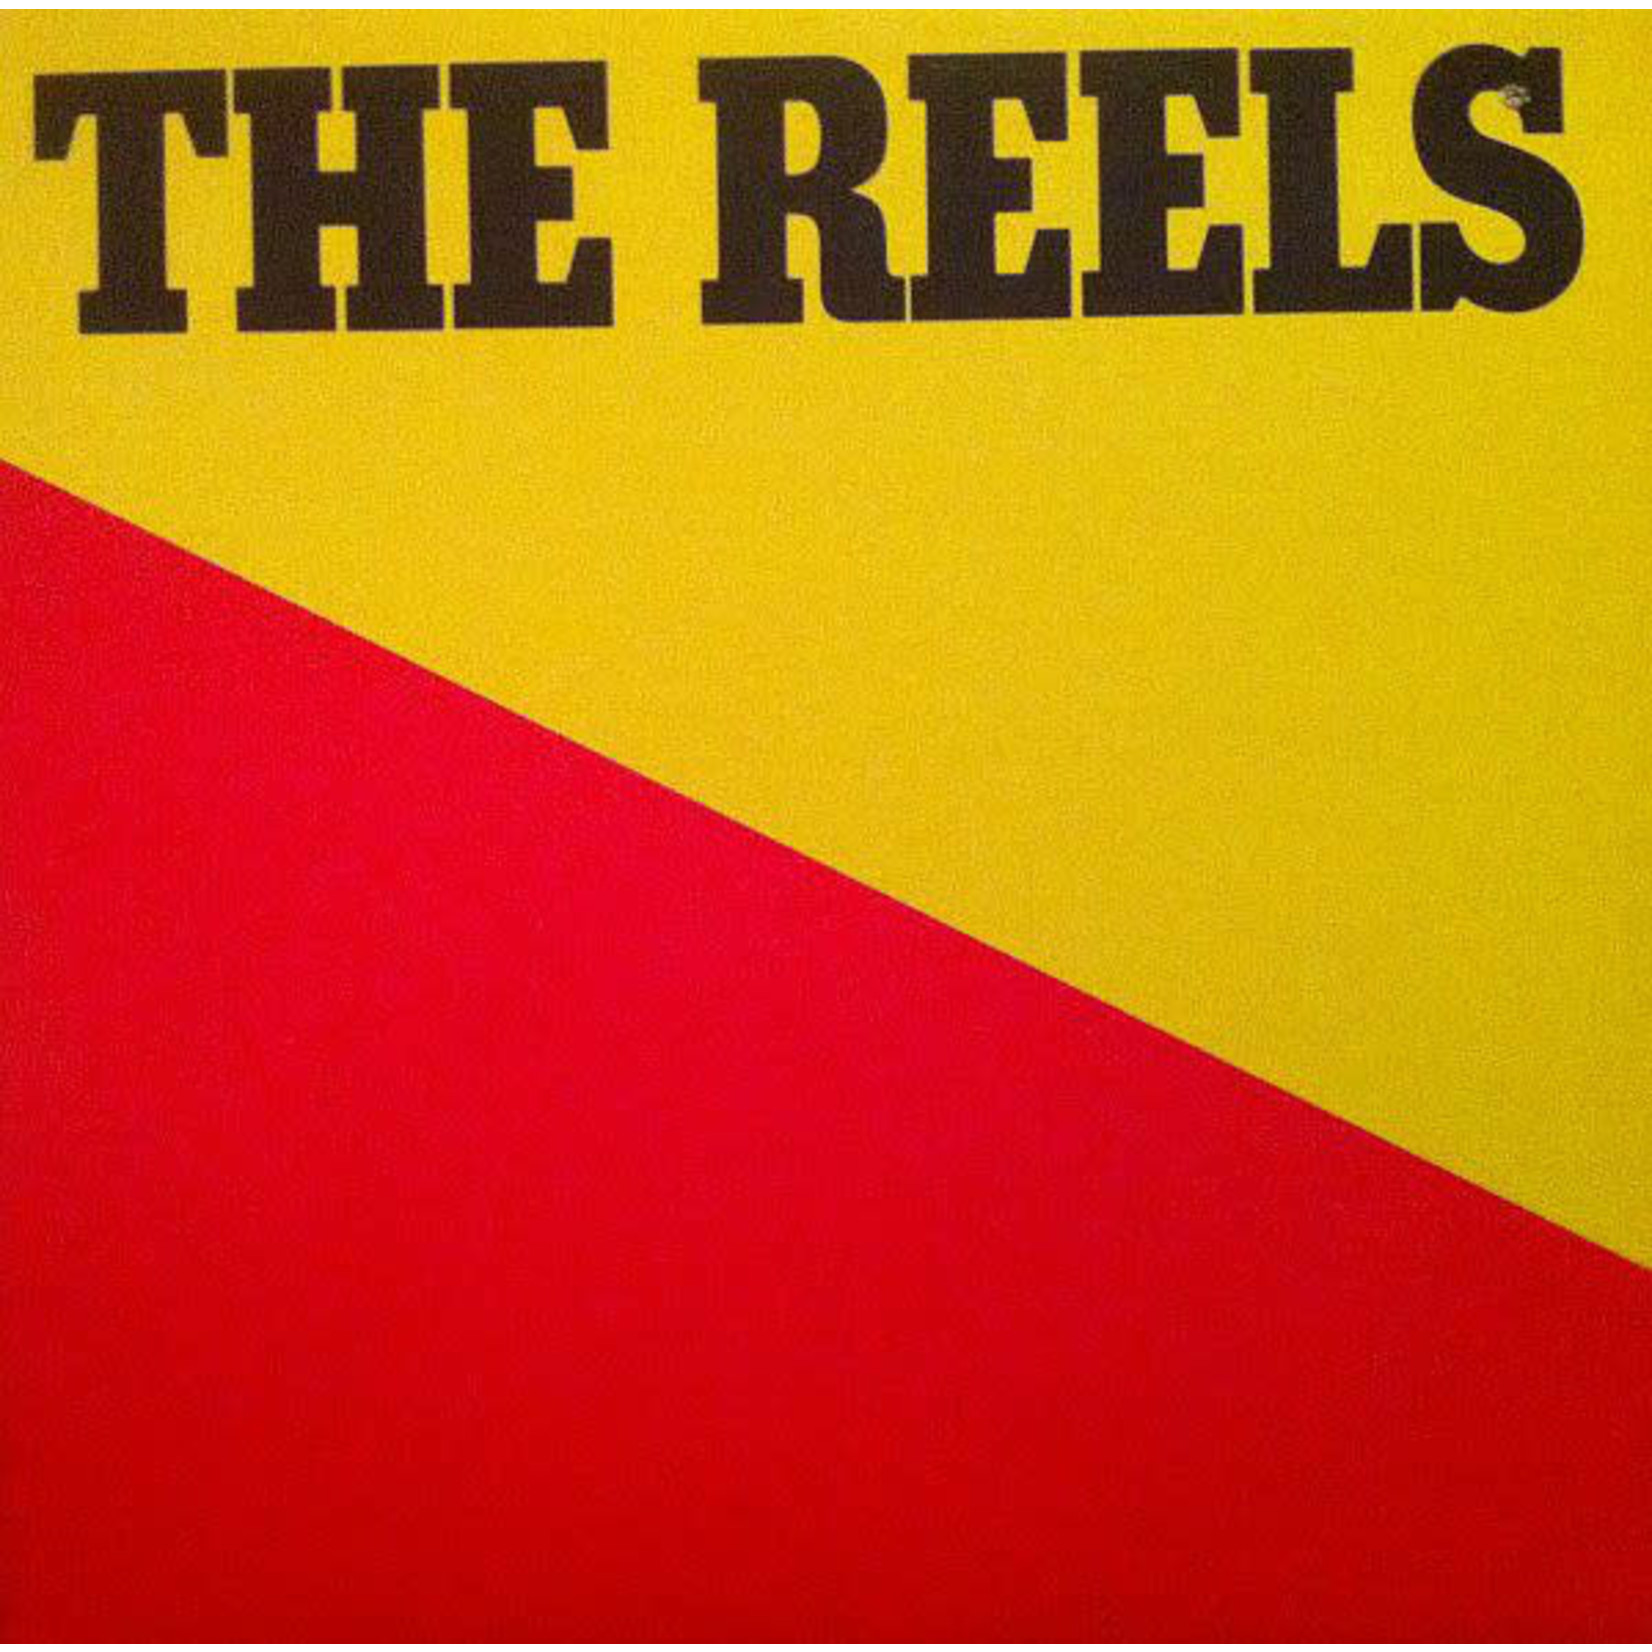 The Reels The Reels – The Reels (VG, 1979, LP, Polydor – PD-1-6275, Canada)